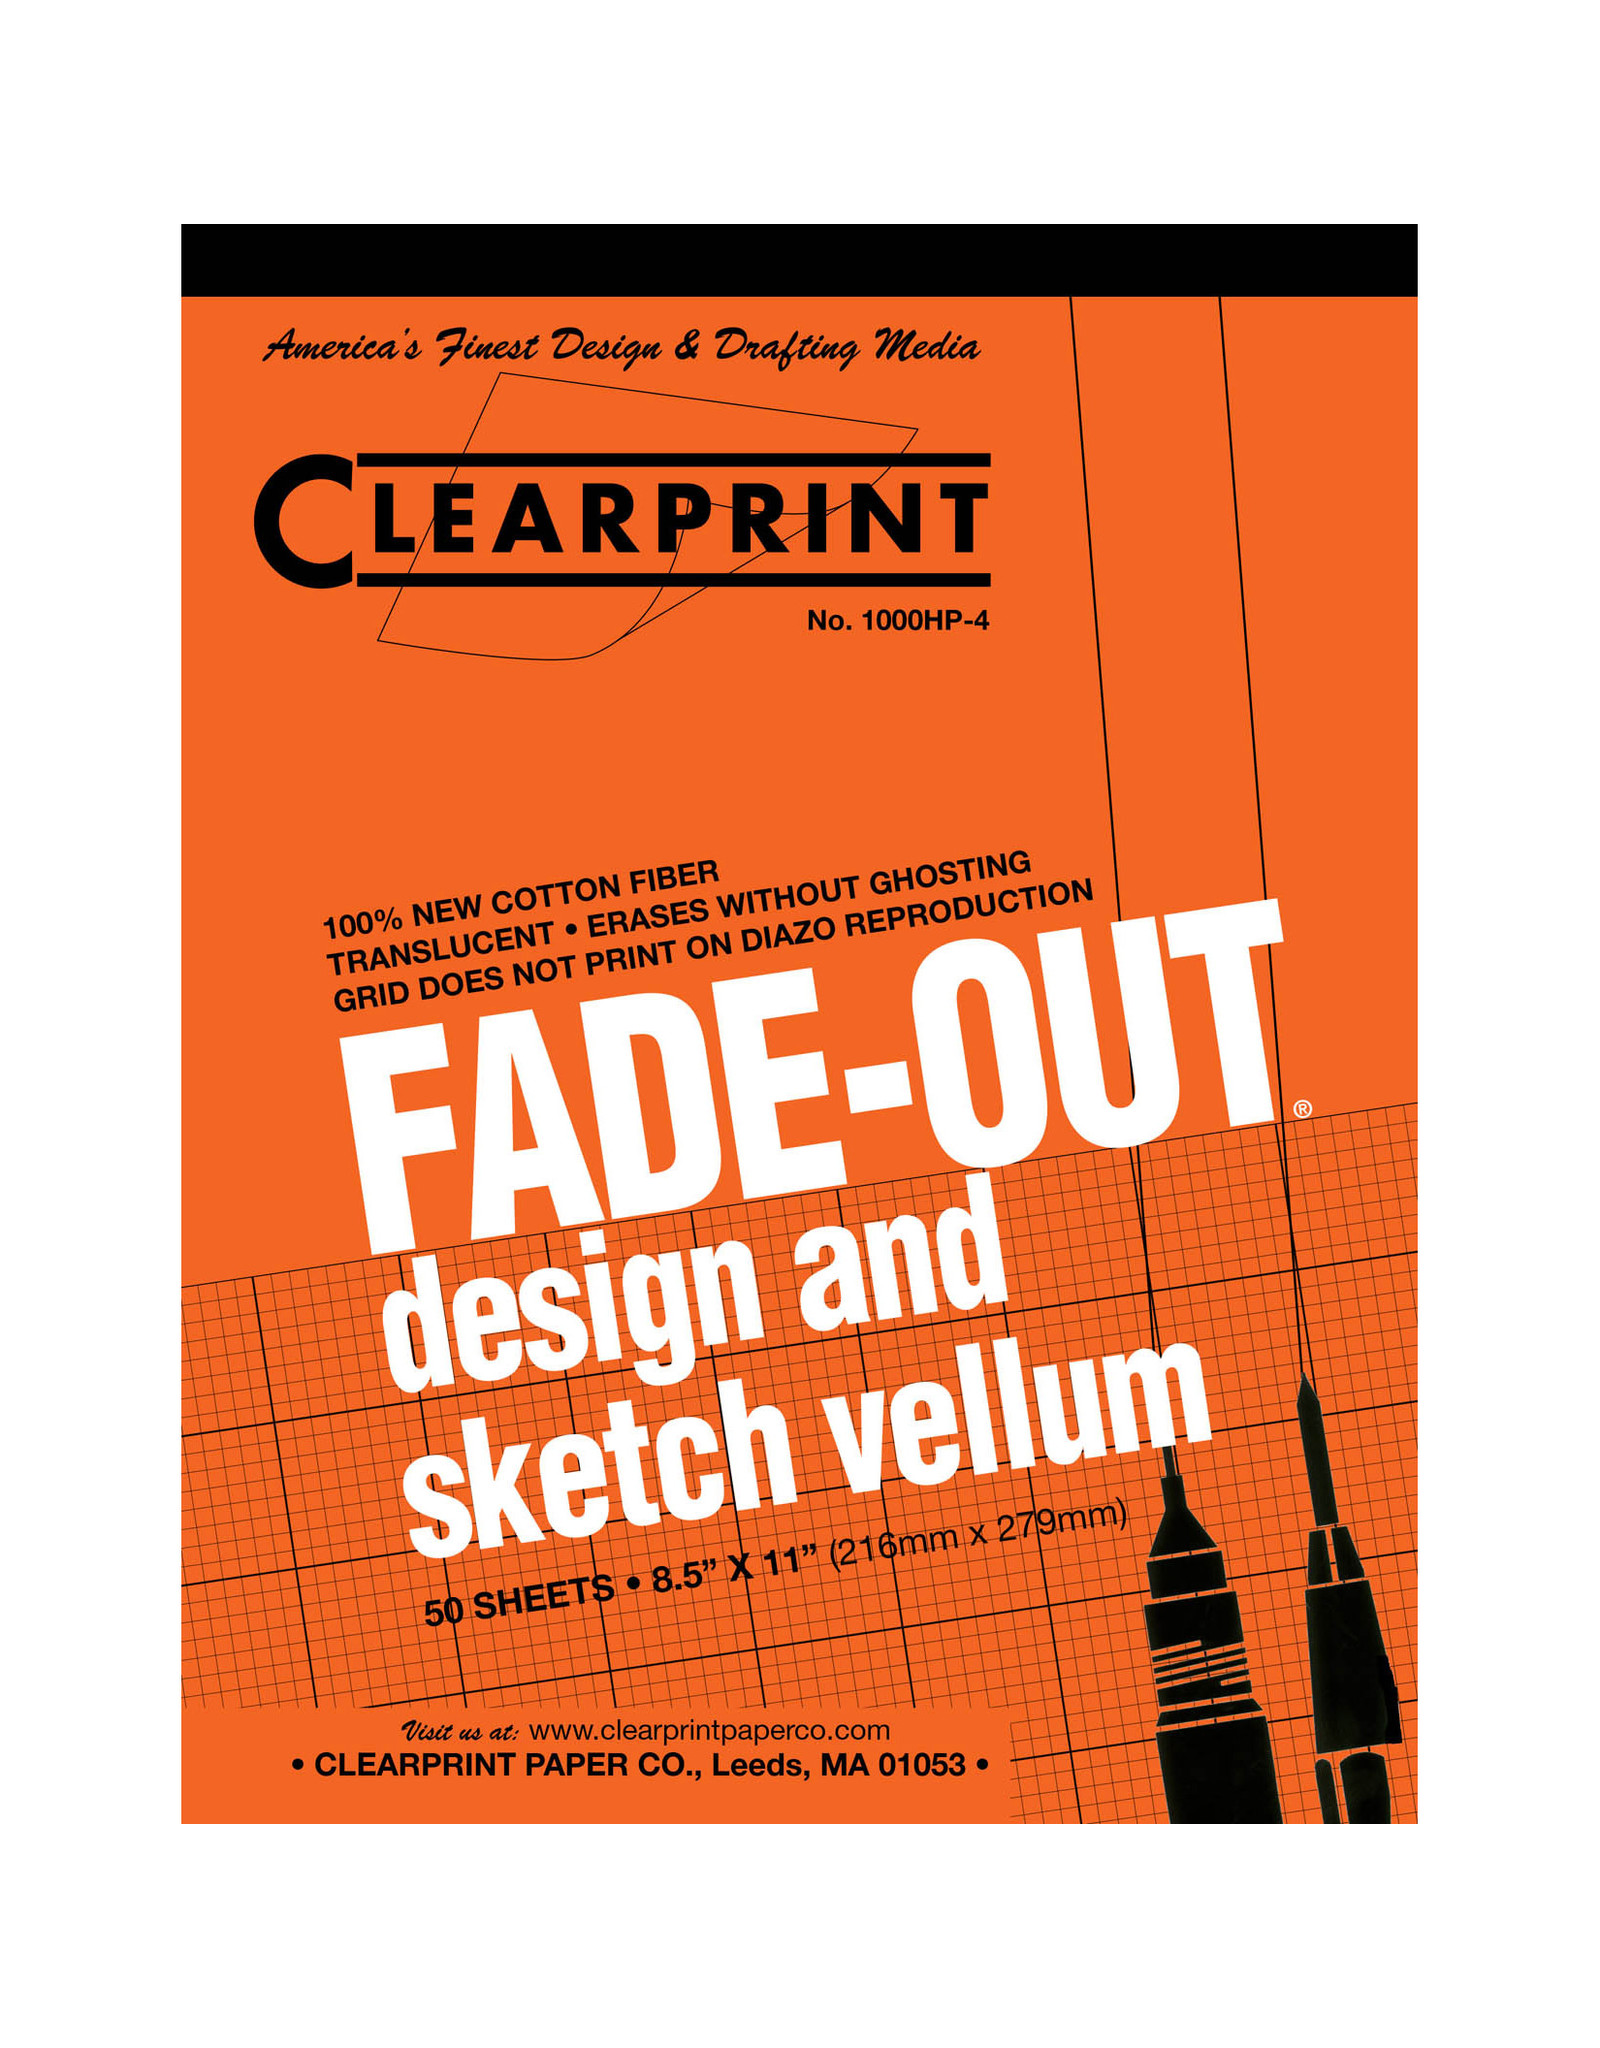 Clearprint Clearprint 1000H Fade-Out Design and Sketch Vellum 4x4 Grid 8.5x11 pack of 50 sheets